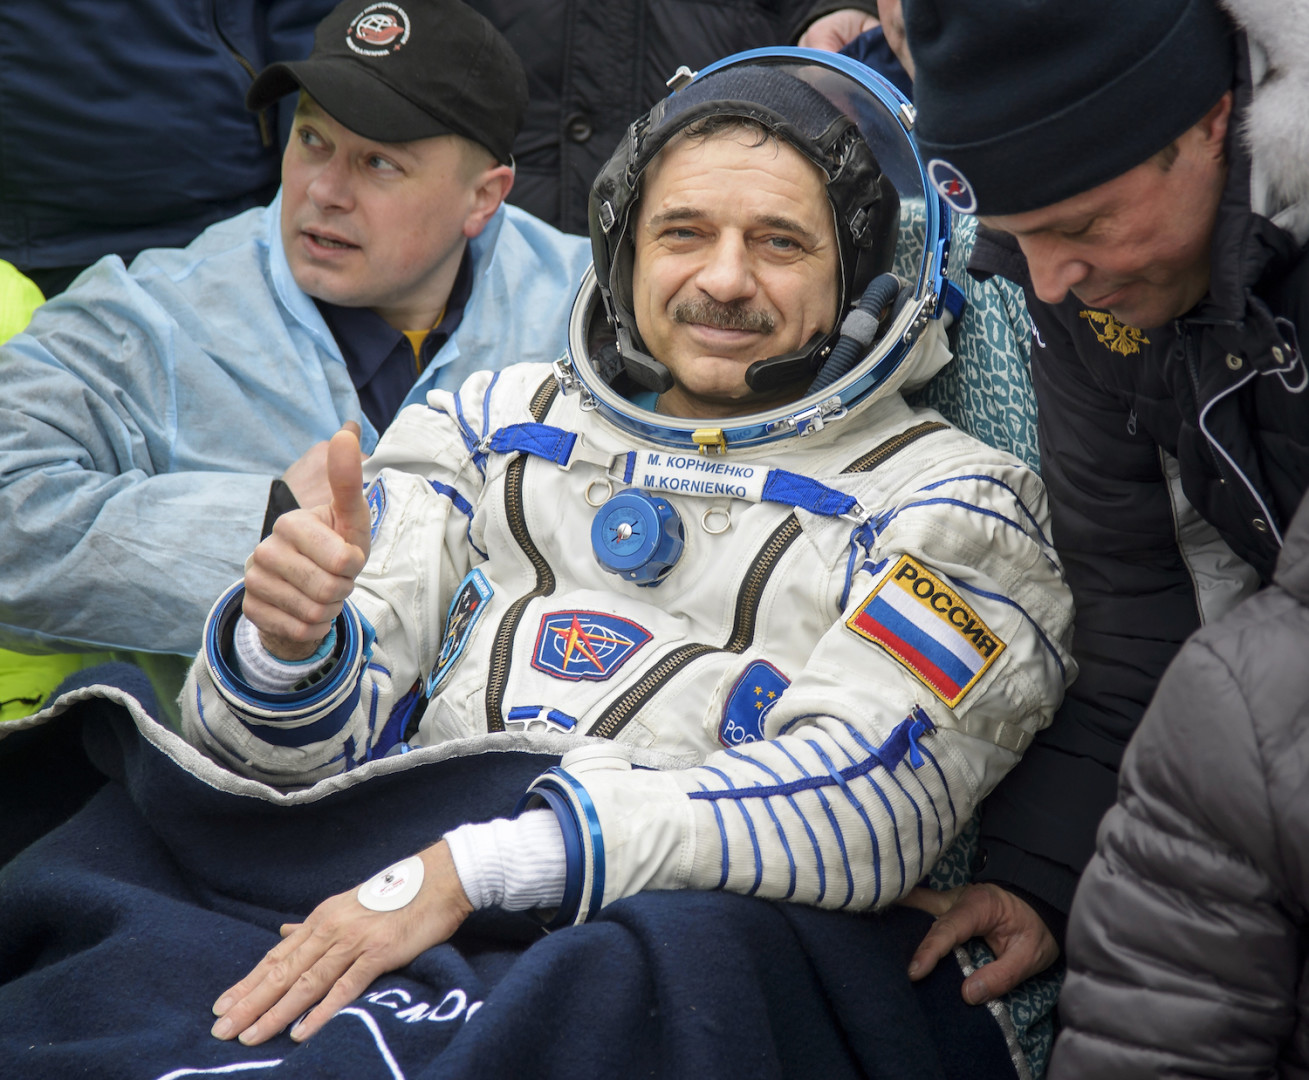 International Space Station (ISS) crew member Mikhail Kornienko of Russia gestures after landing near the town of Dzhezkazgan, Kazakhstan, Wednesday, March 2, 2016. U.S. astronaut Scott Kelly and Kornienko returned to Earth on Wednesday after spending almost a year in space in a ground-breaking experiment foreshadowing a potential manned mission to Mars. (Bill Ingalls/NASA via AP)